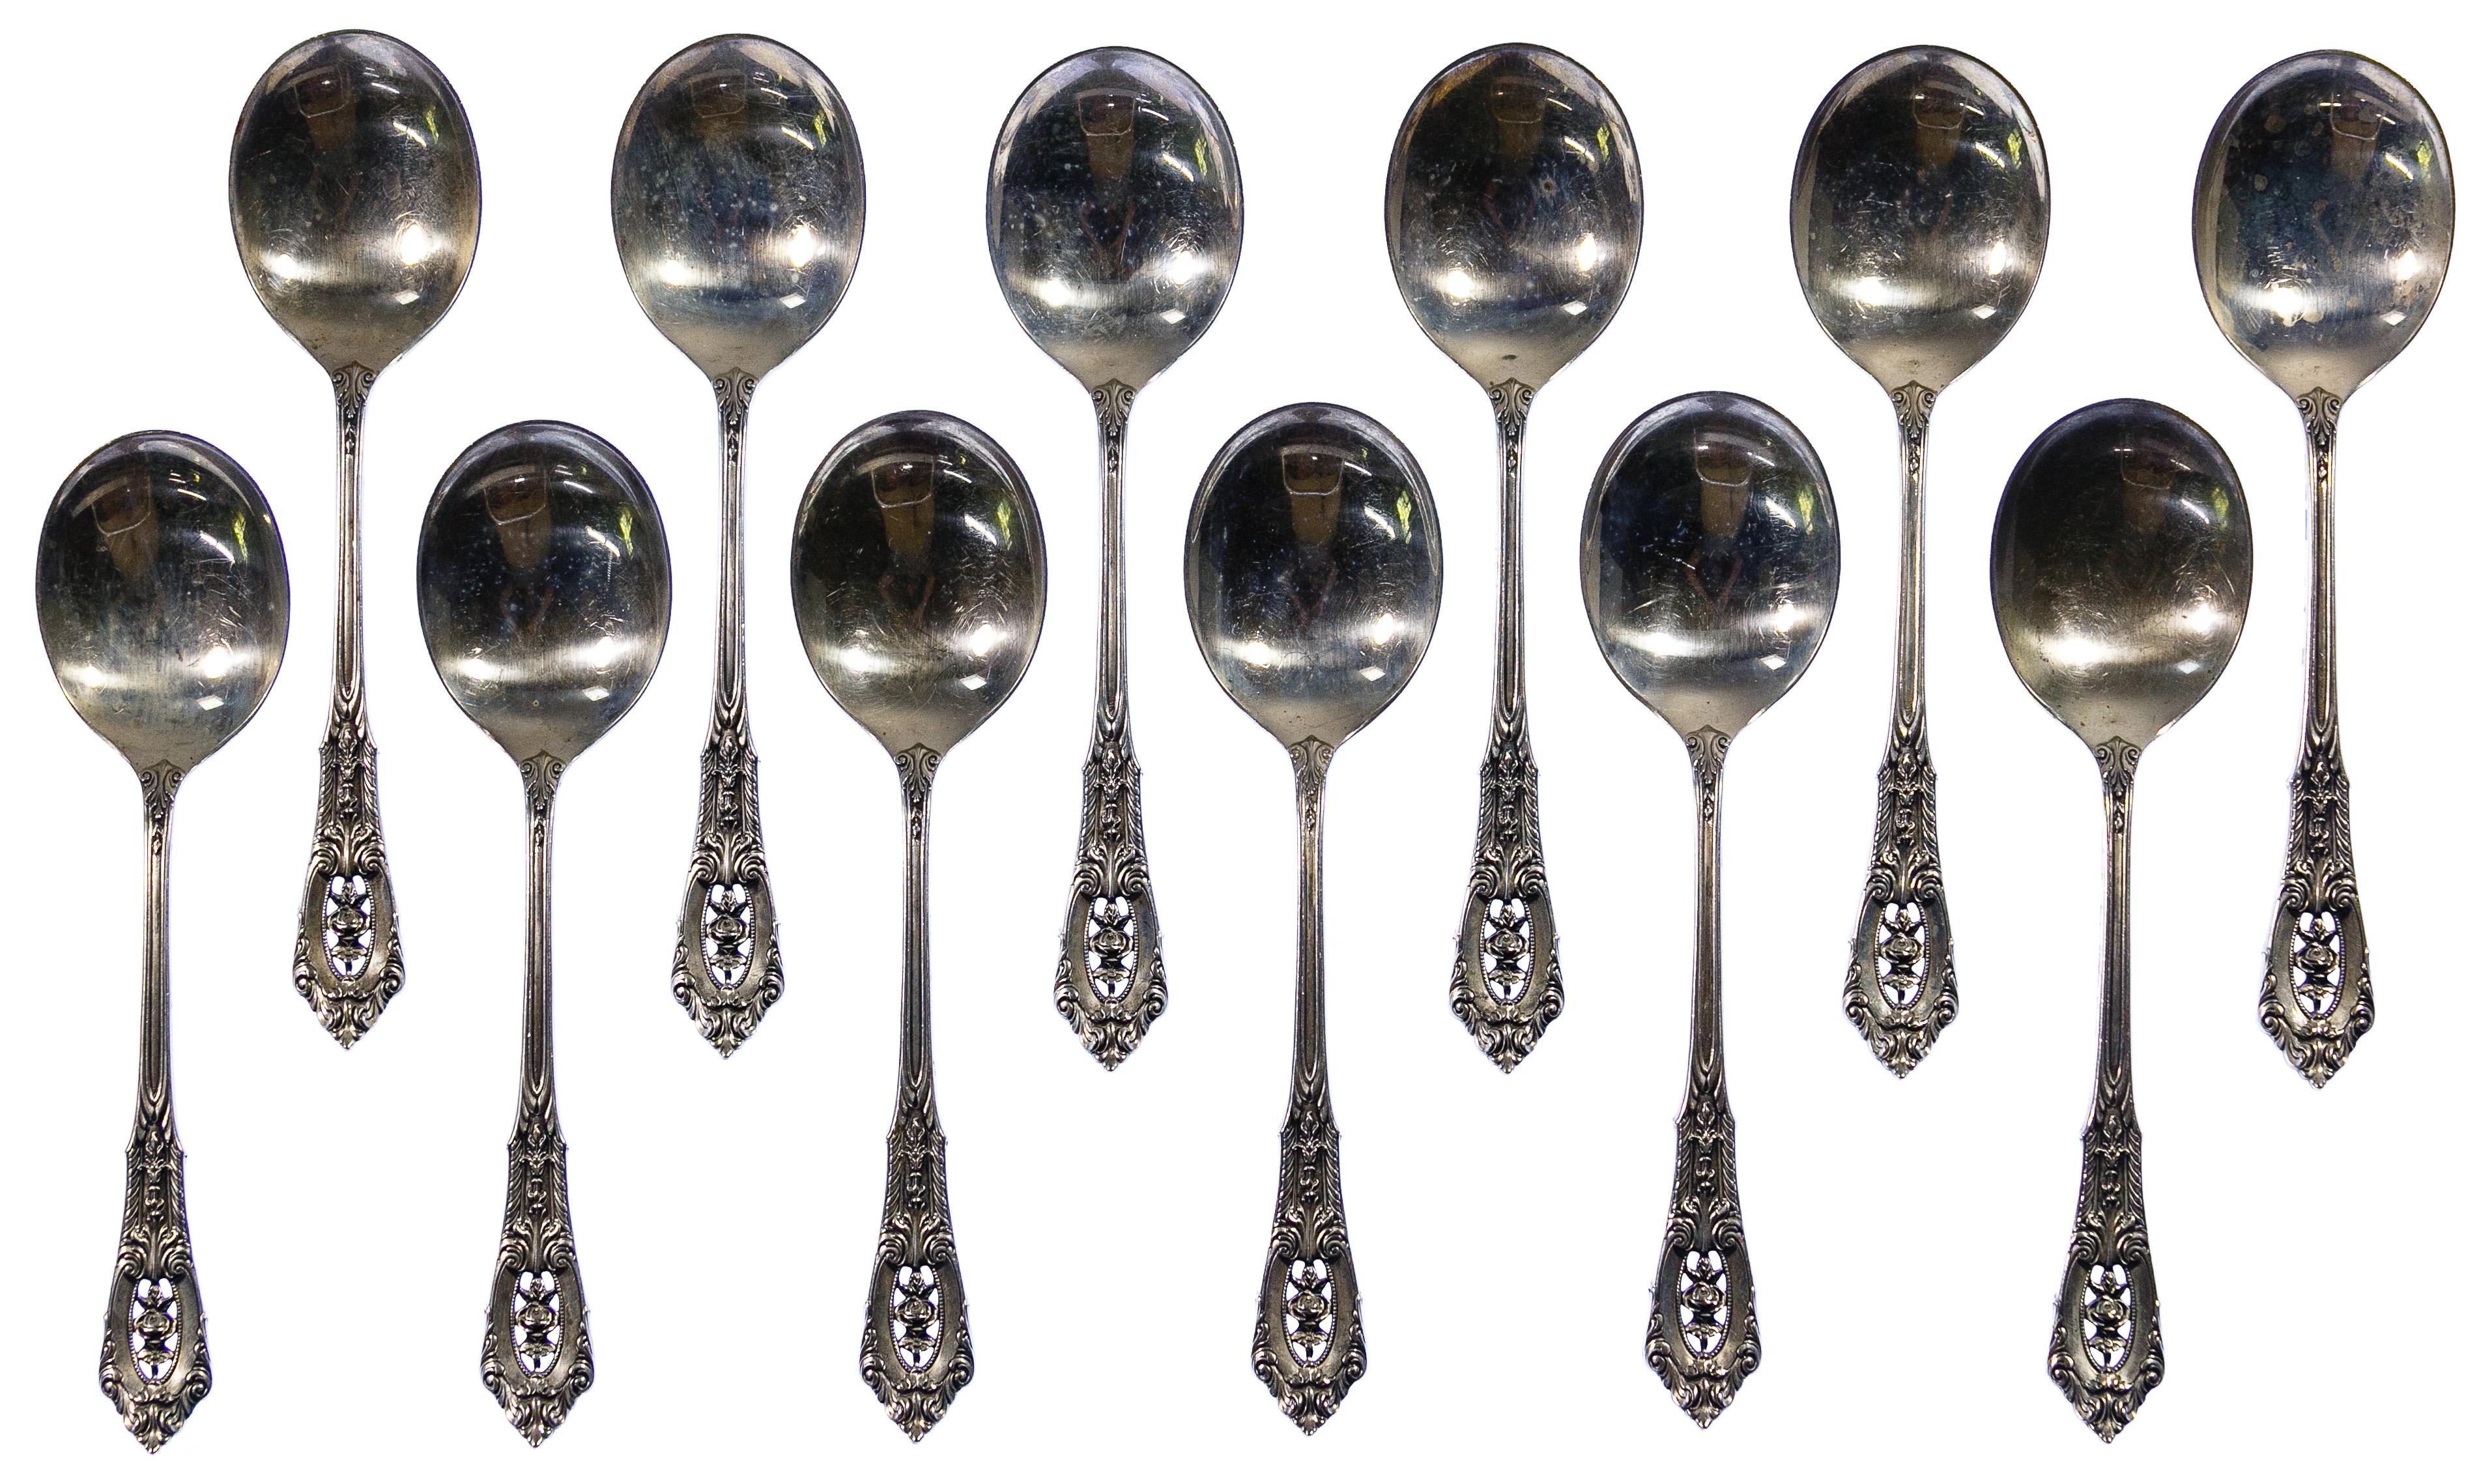 Wallace 'Rose Point' Sterling Silver Flatware Service